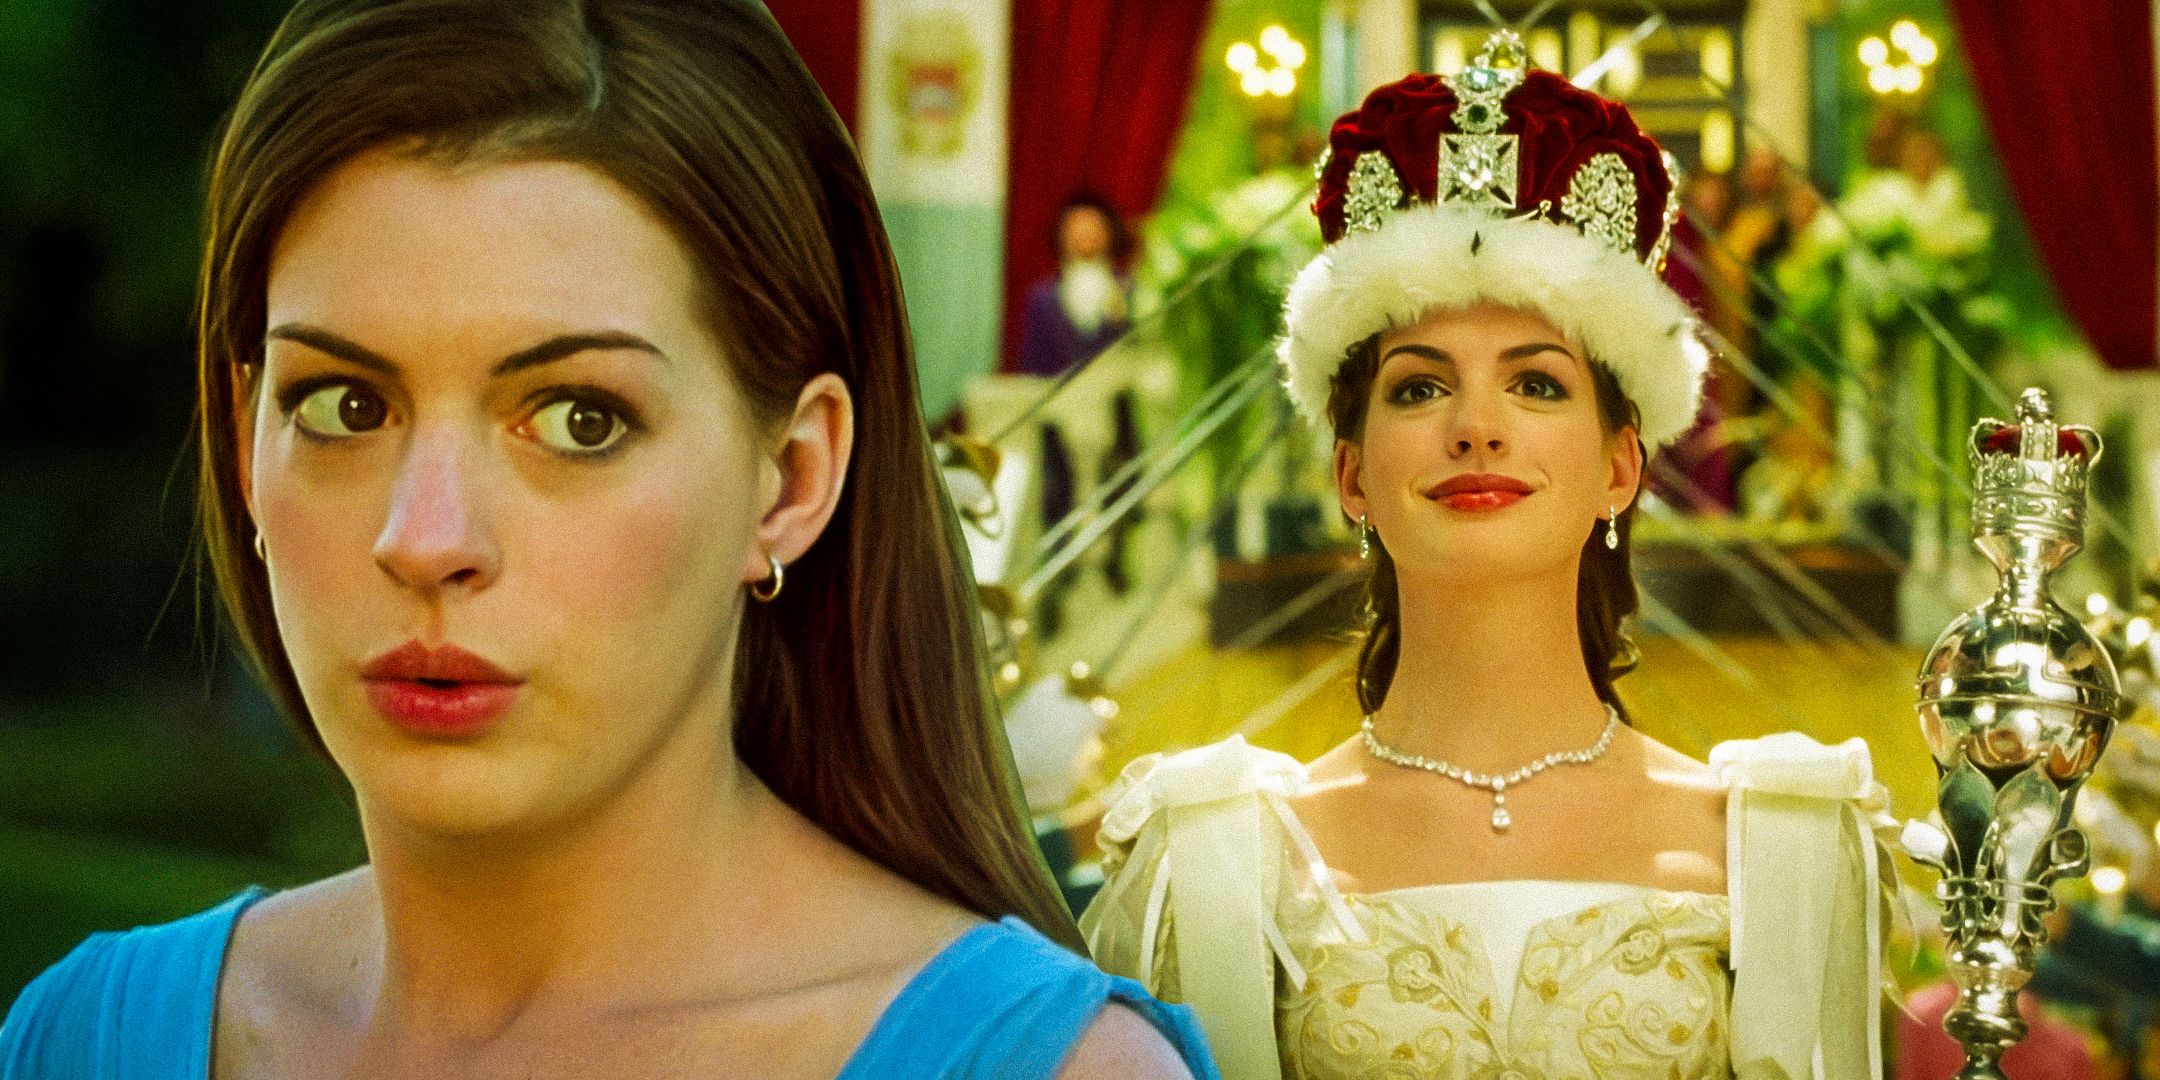 Now Is The Perfect Time For Princess Diaries 3 To Break A 20-Year-Old Story Trend